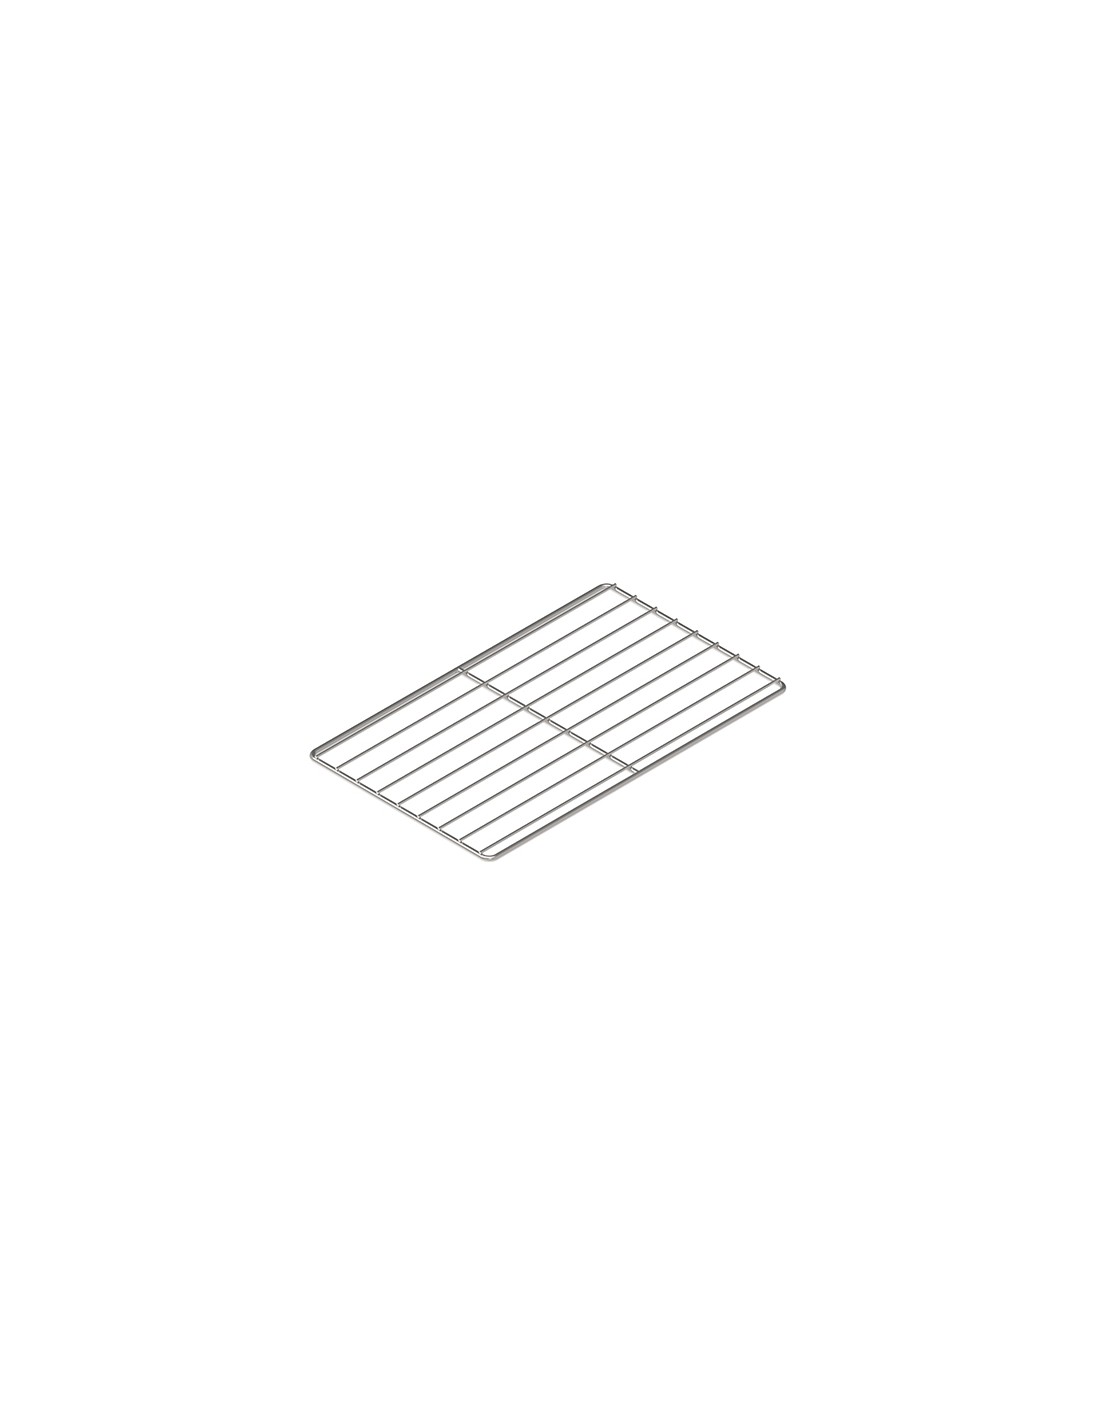 AISI 304 stainless steel grille - GN 1/1 - cm 53 x 32.5 x 1.2 h